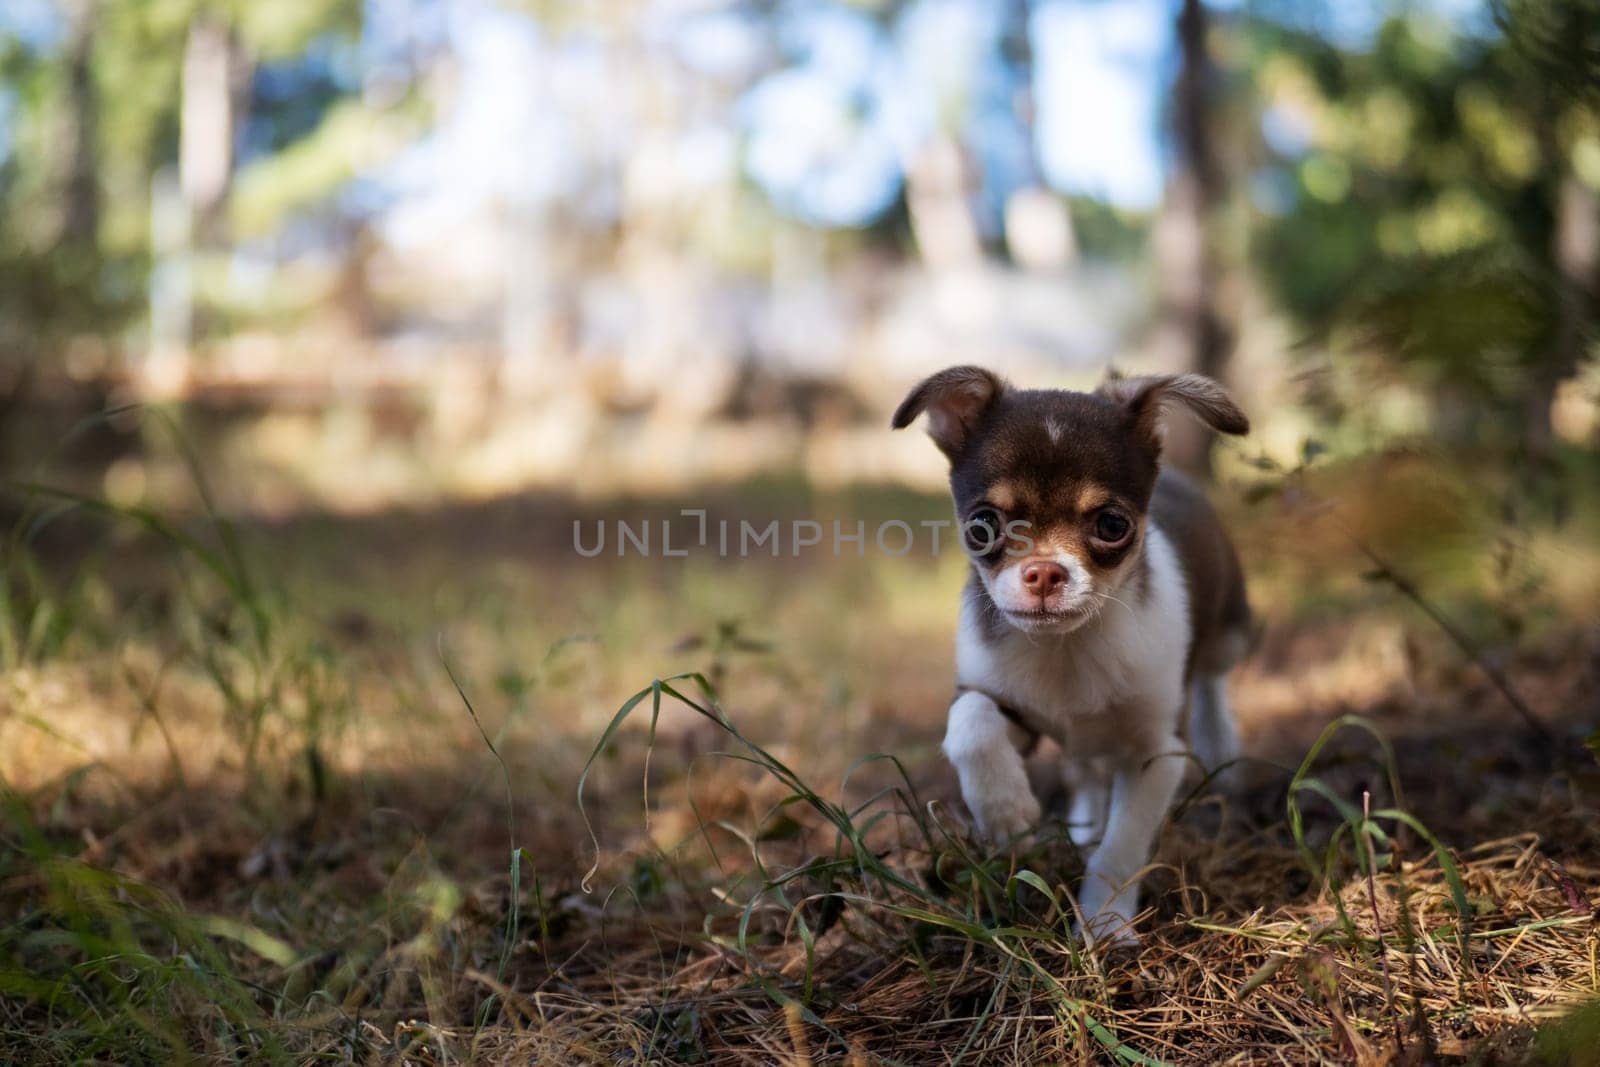 An inquisitive Chihuahua puppy looks out from a forest path, surrounded by towering trees and dappled light.